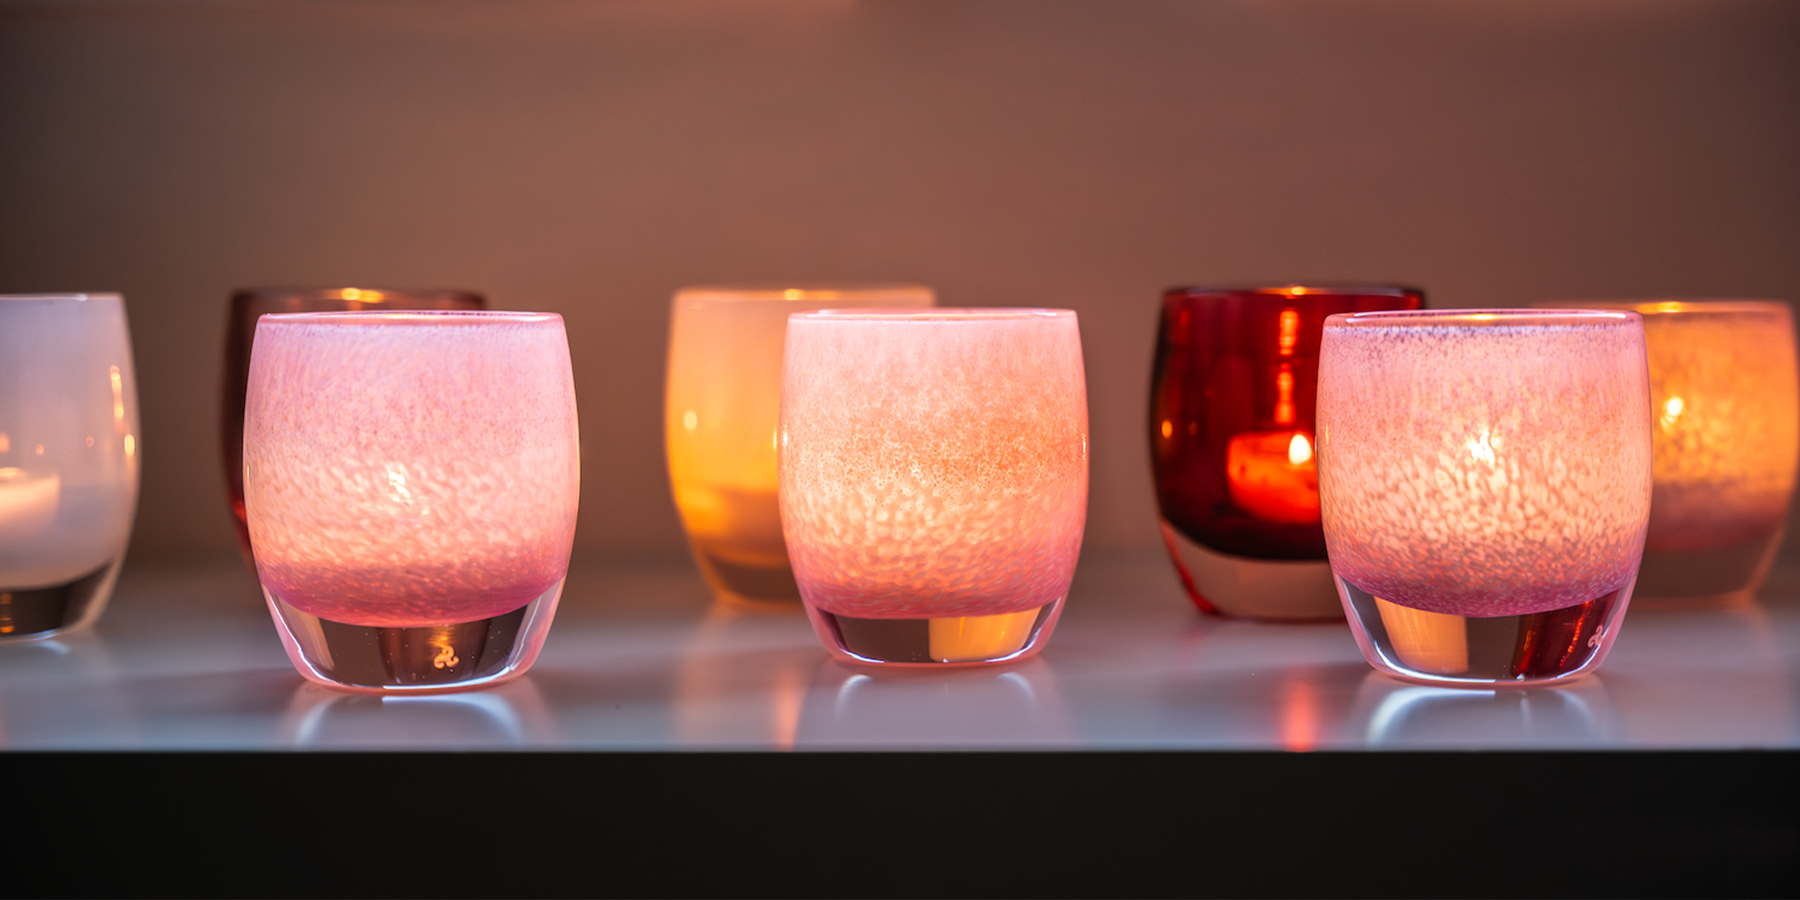 fabulous, shimmering layered pink hand-blown glass votive candle holder.